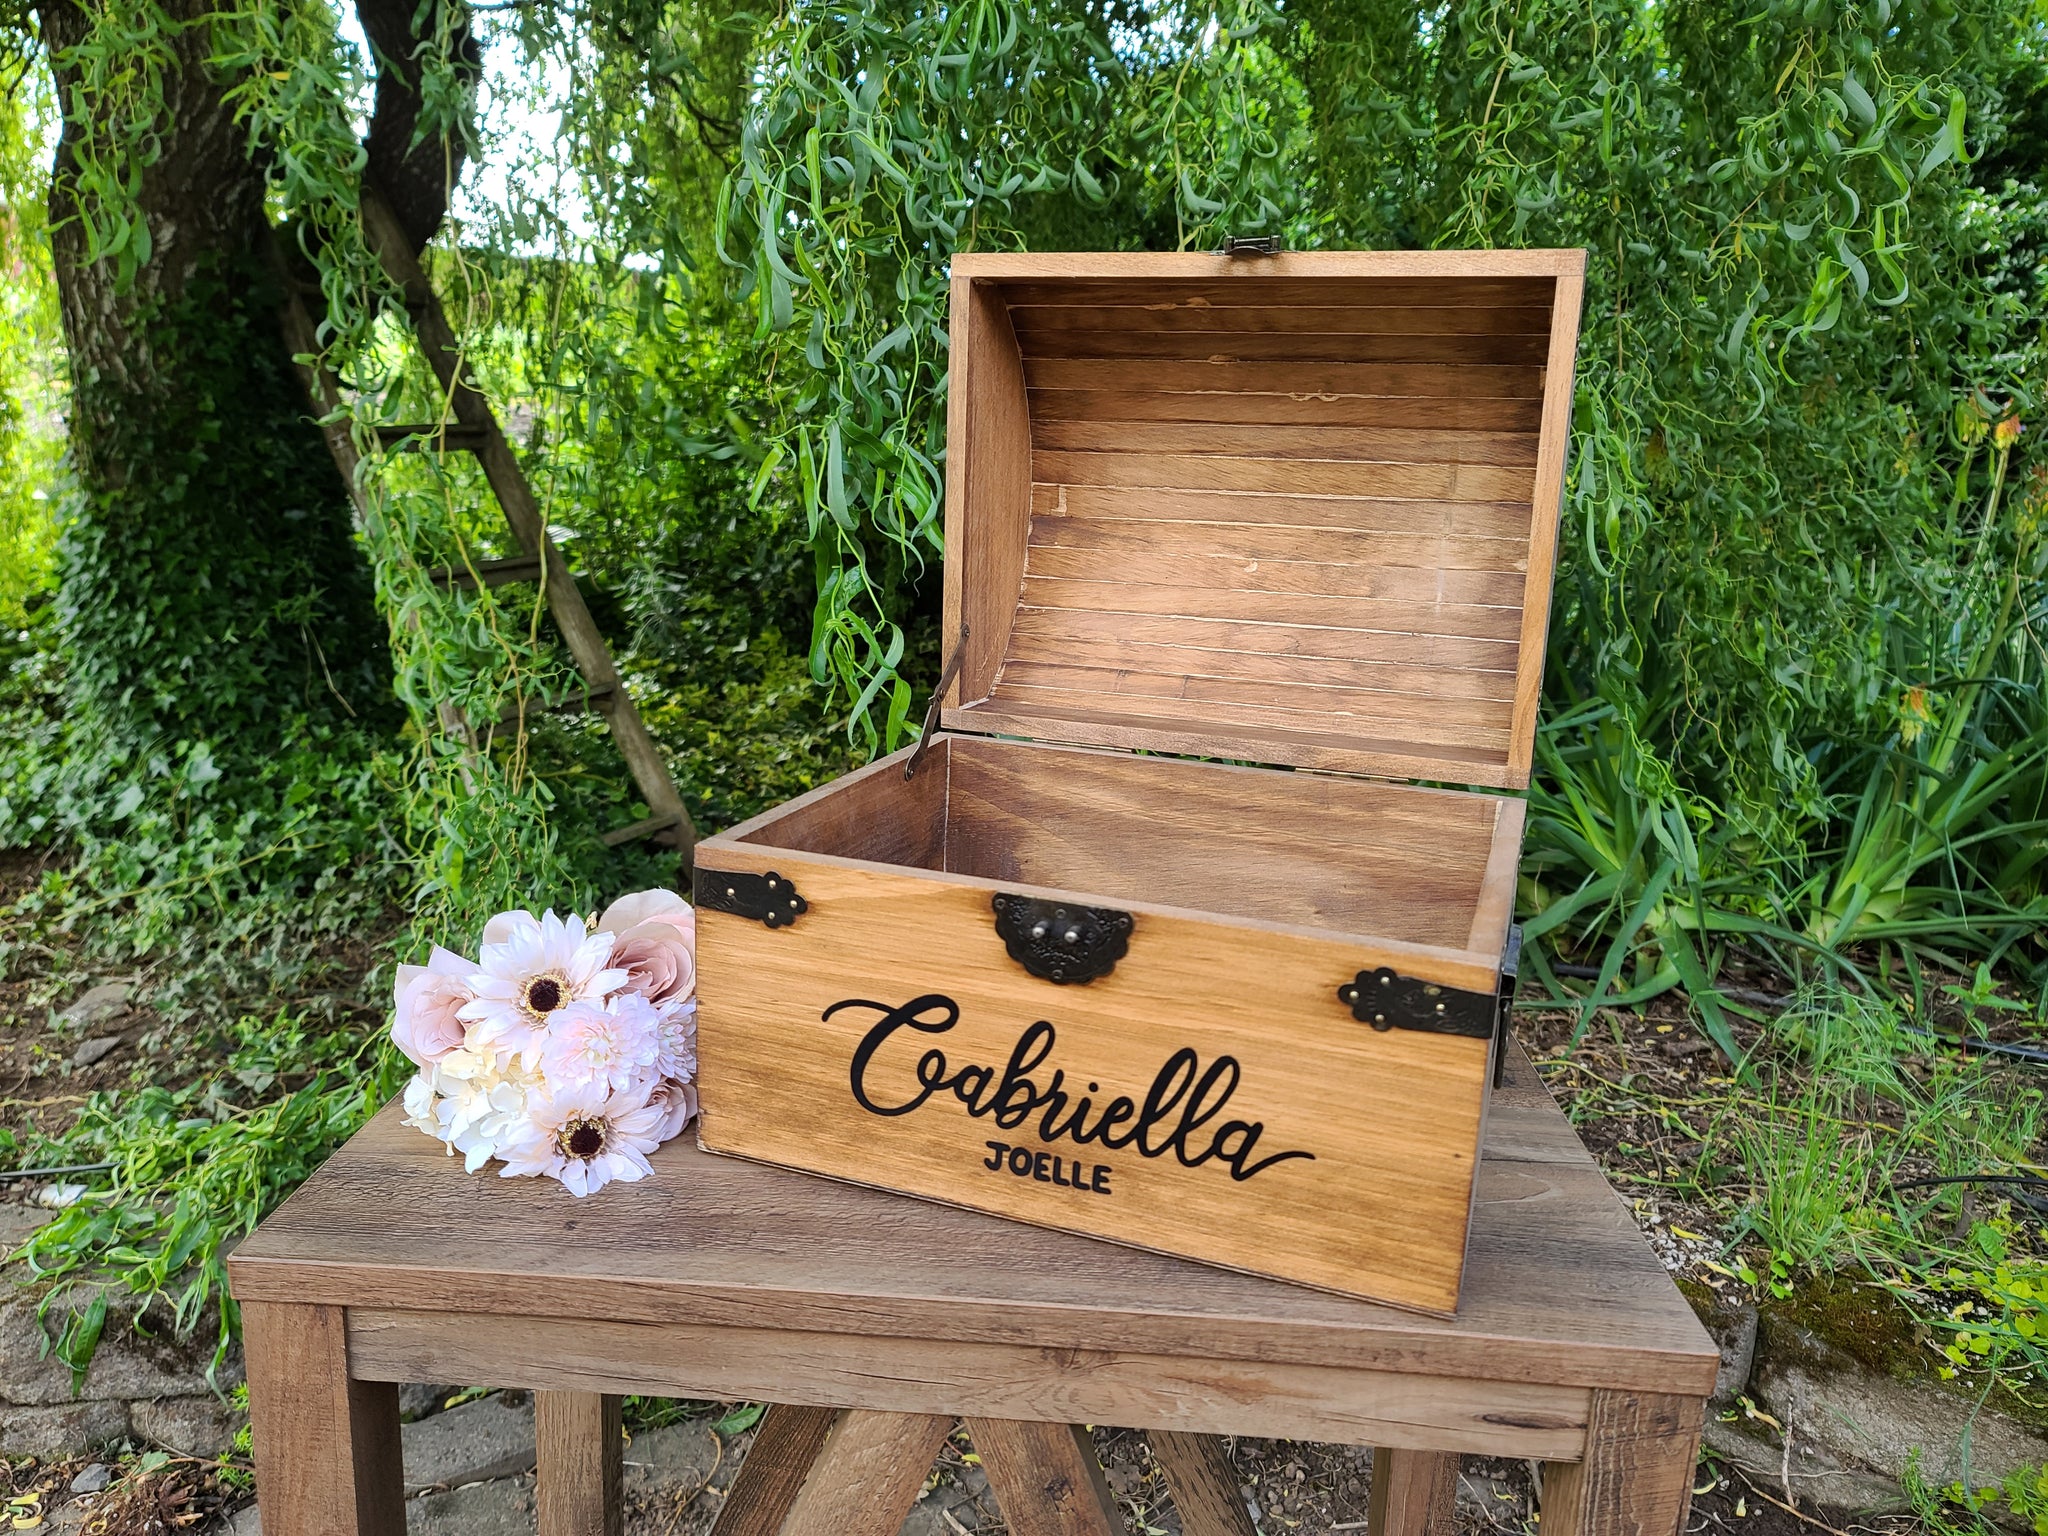 Rustic Wedding Card Box I like the idea of a wooden box with a